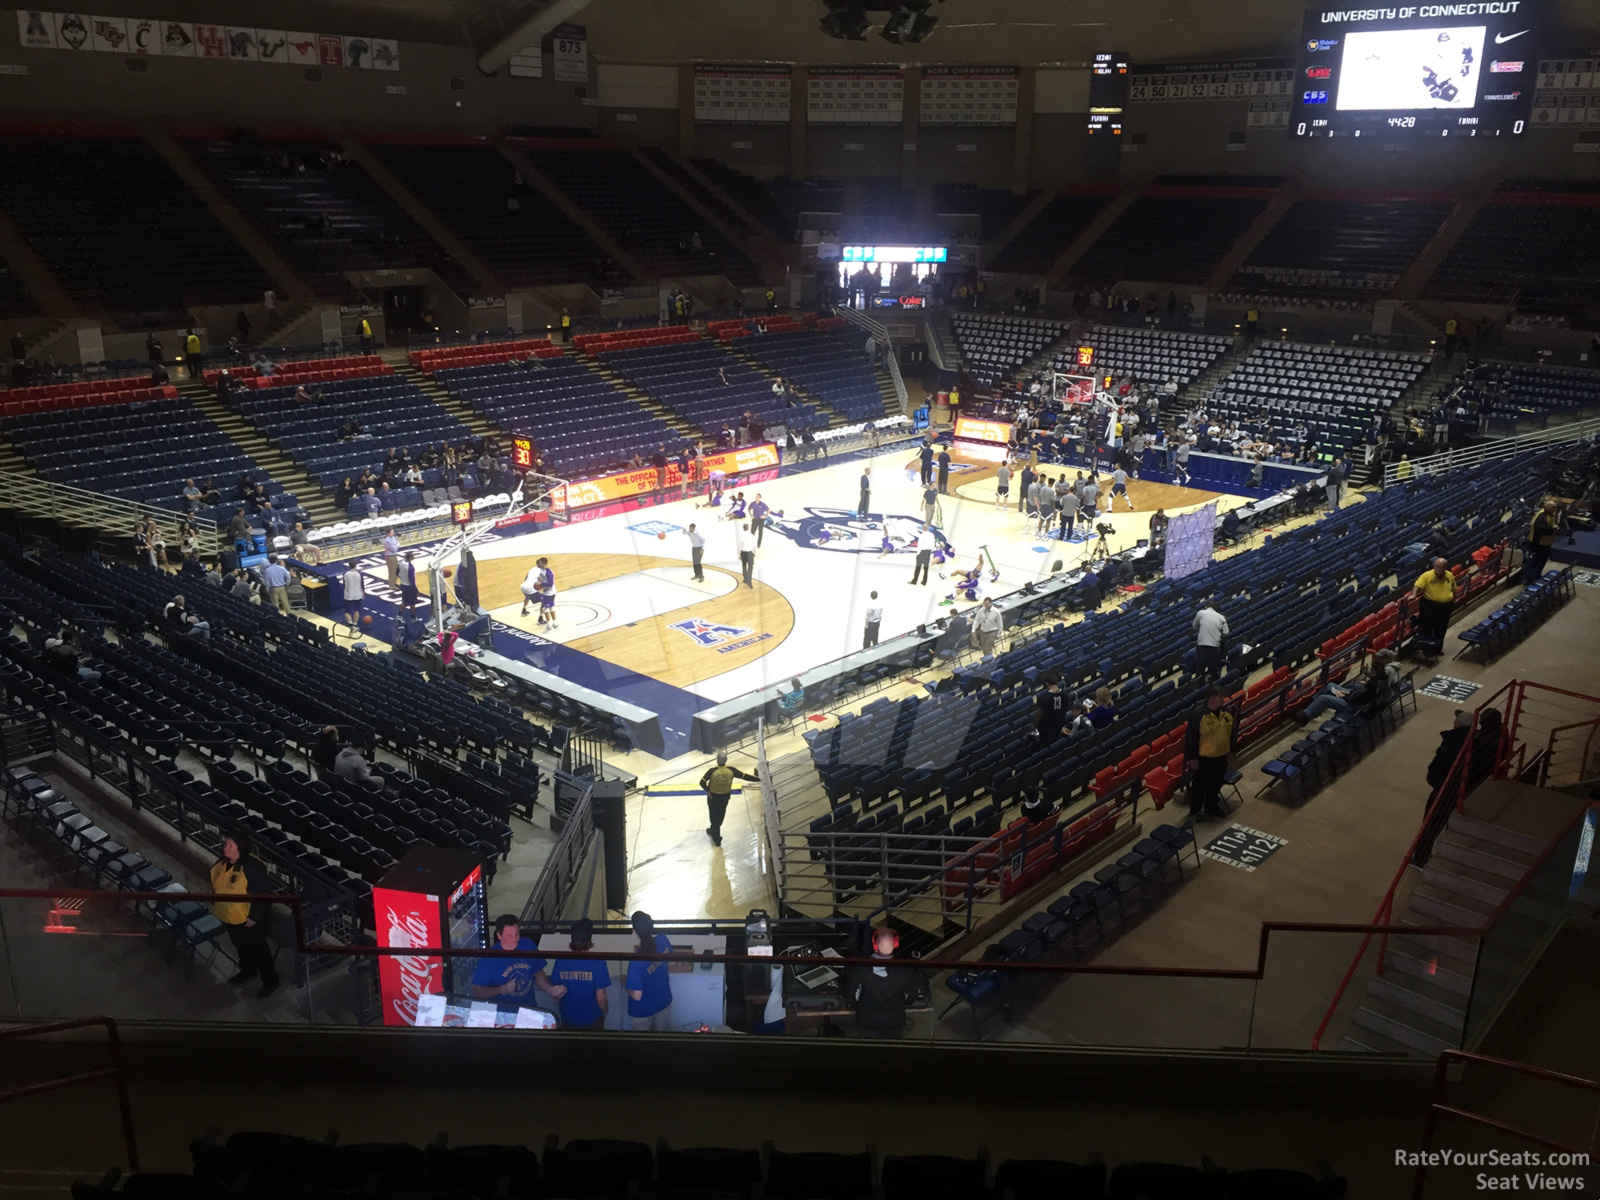 section 5, row 9 seat view  - gampel pavilion